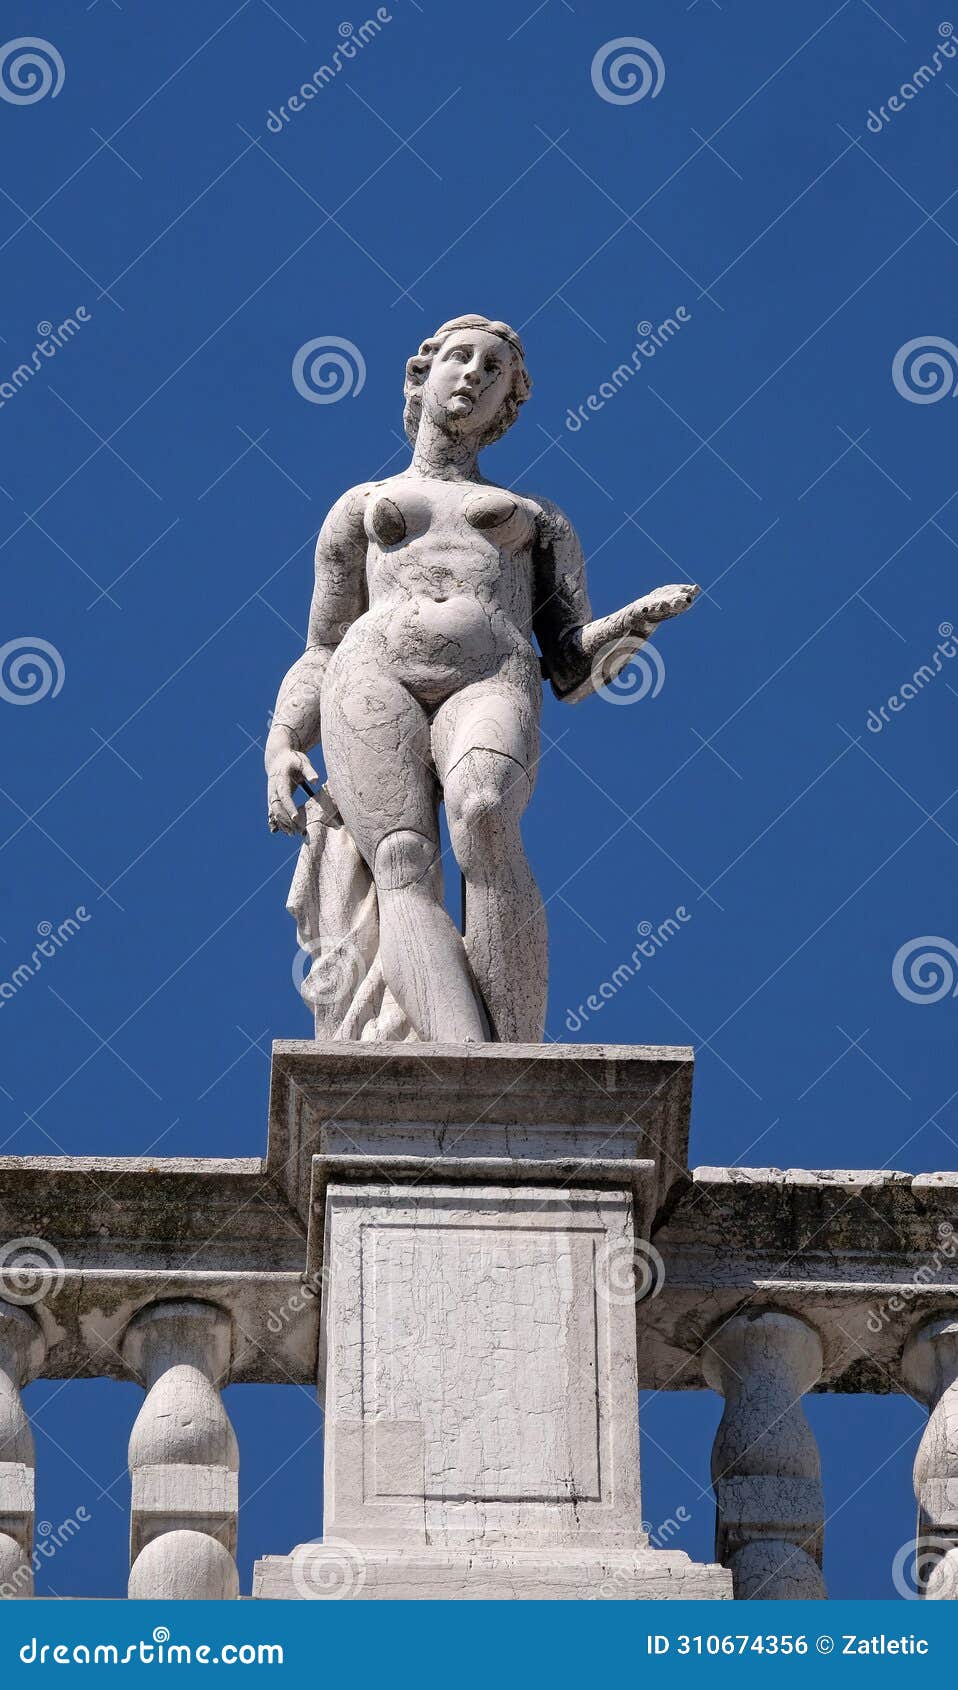 statue at the top of national library of st mark`s biblioteca marciana, venice